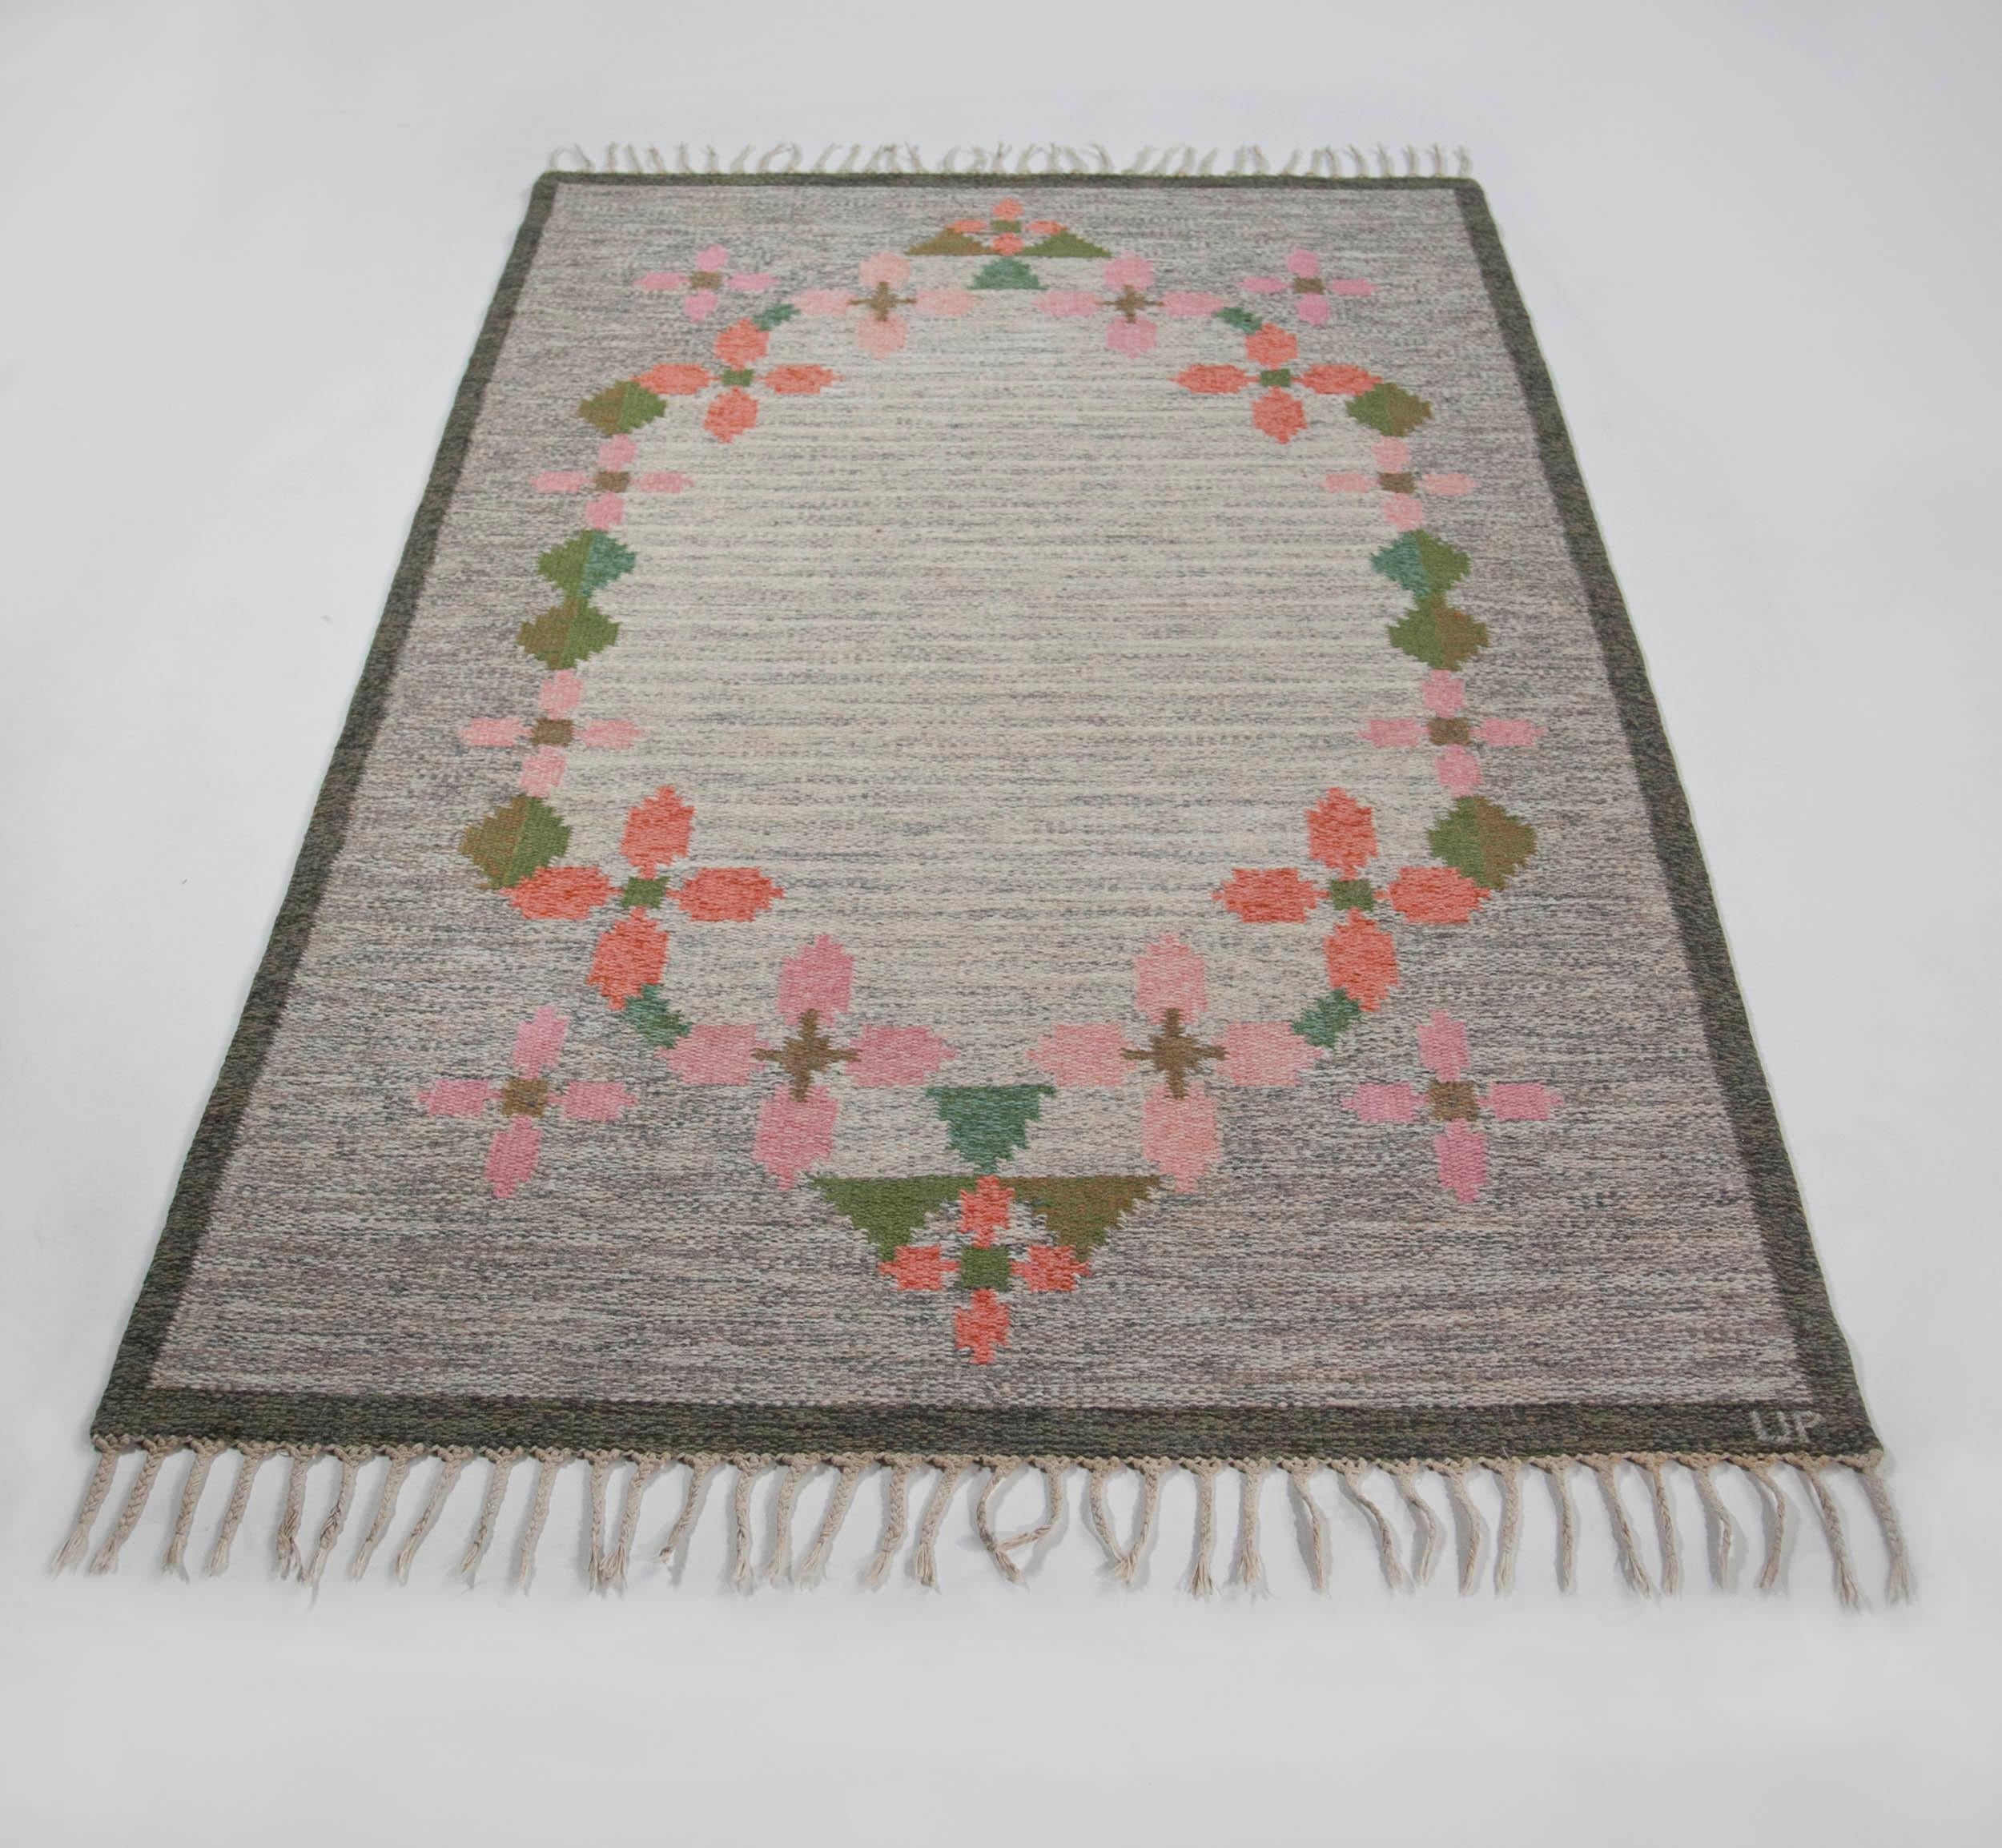 Ulla Parkdah Swedish flat-weave rug, signed UP, Sweden, 1960s

This particular Swedish carpet is a wonderful representation of midcentury Scandinavian rug design, especially in its treatment of geometric floral details. In the case of this carpet,